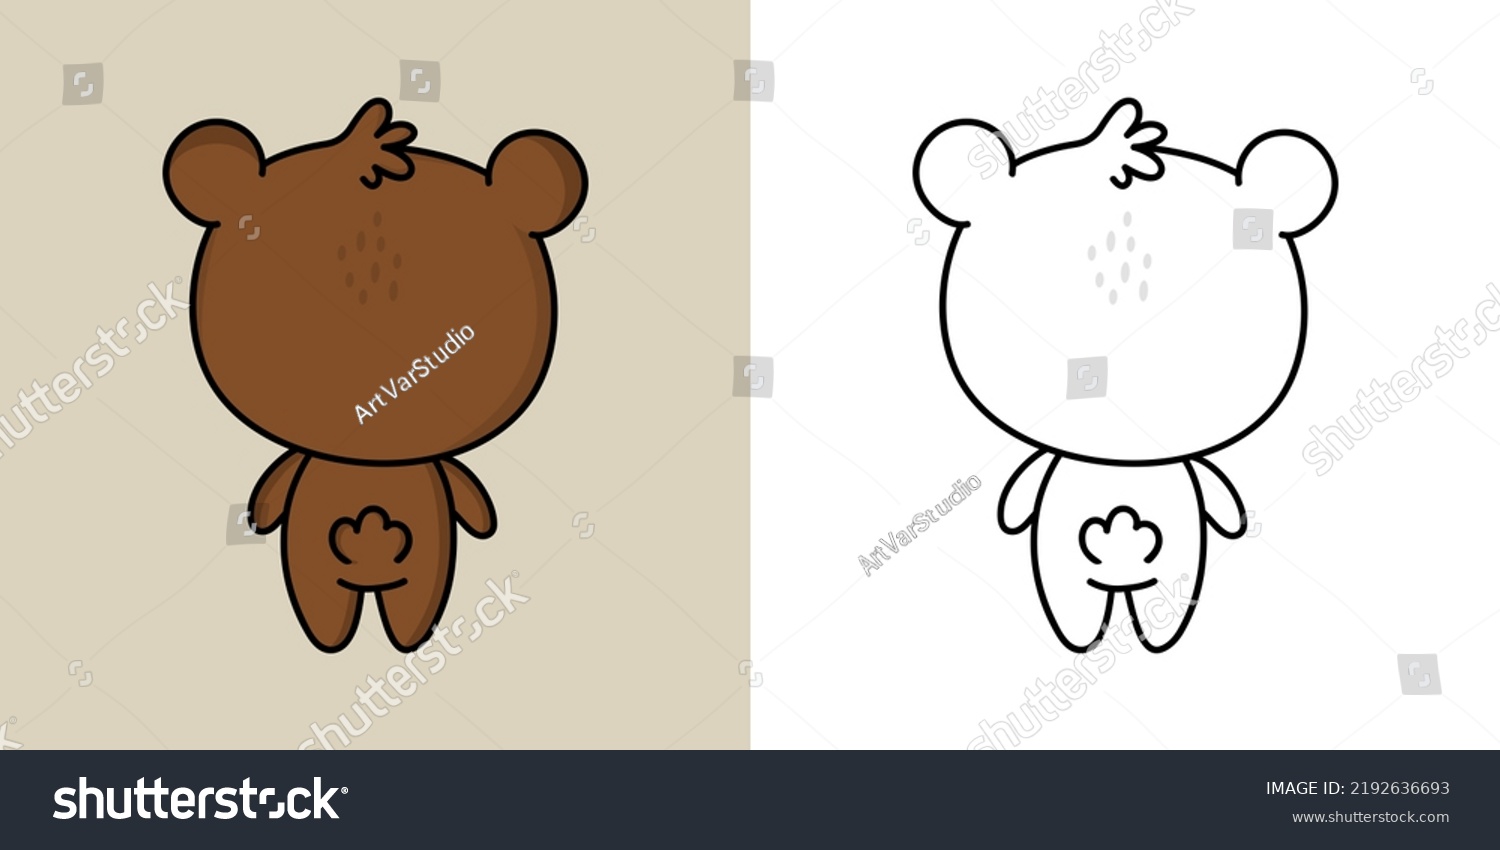 SVG of Cute Brown Bear Clipart Illustration and Black and White. Funny Clip Art Bear. Vector Illustration of a Kawaii Animal for Coloring Pages, Stickers, Baby Shower, Prints for Clothes.
 svg